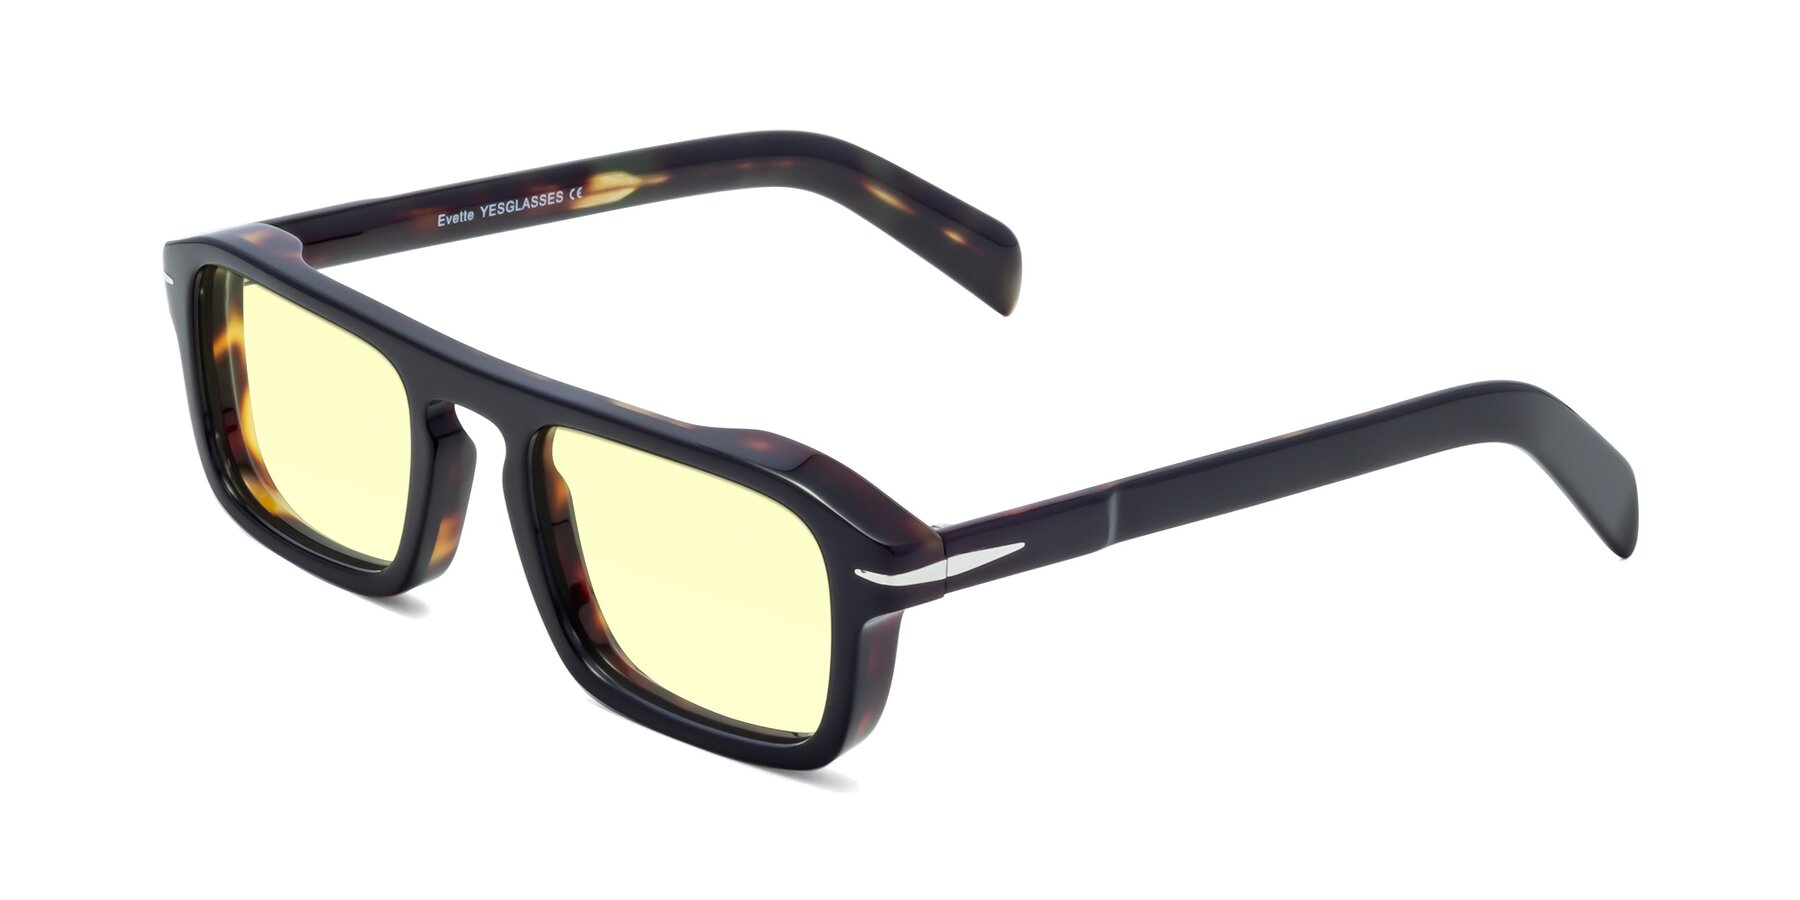 Angle of Evette in Black-Tortoise with Light Yellow Tinted Lenses